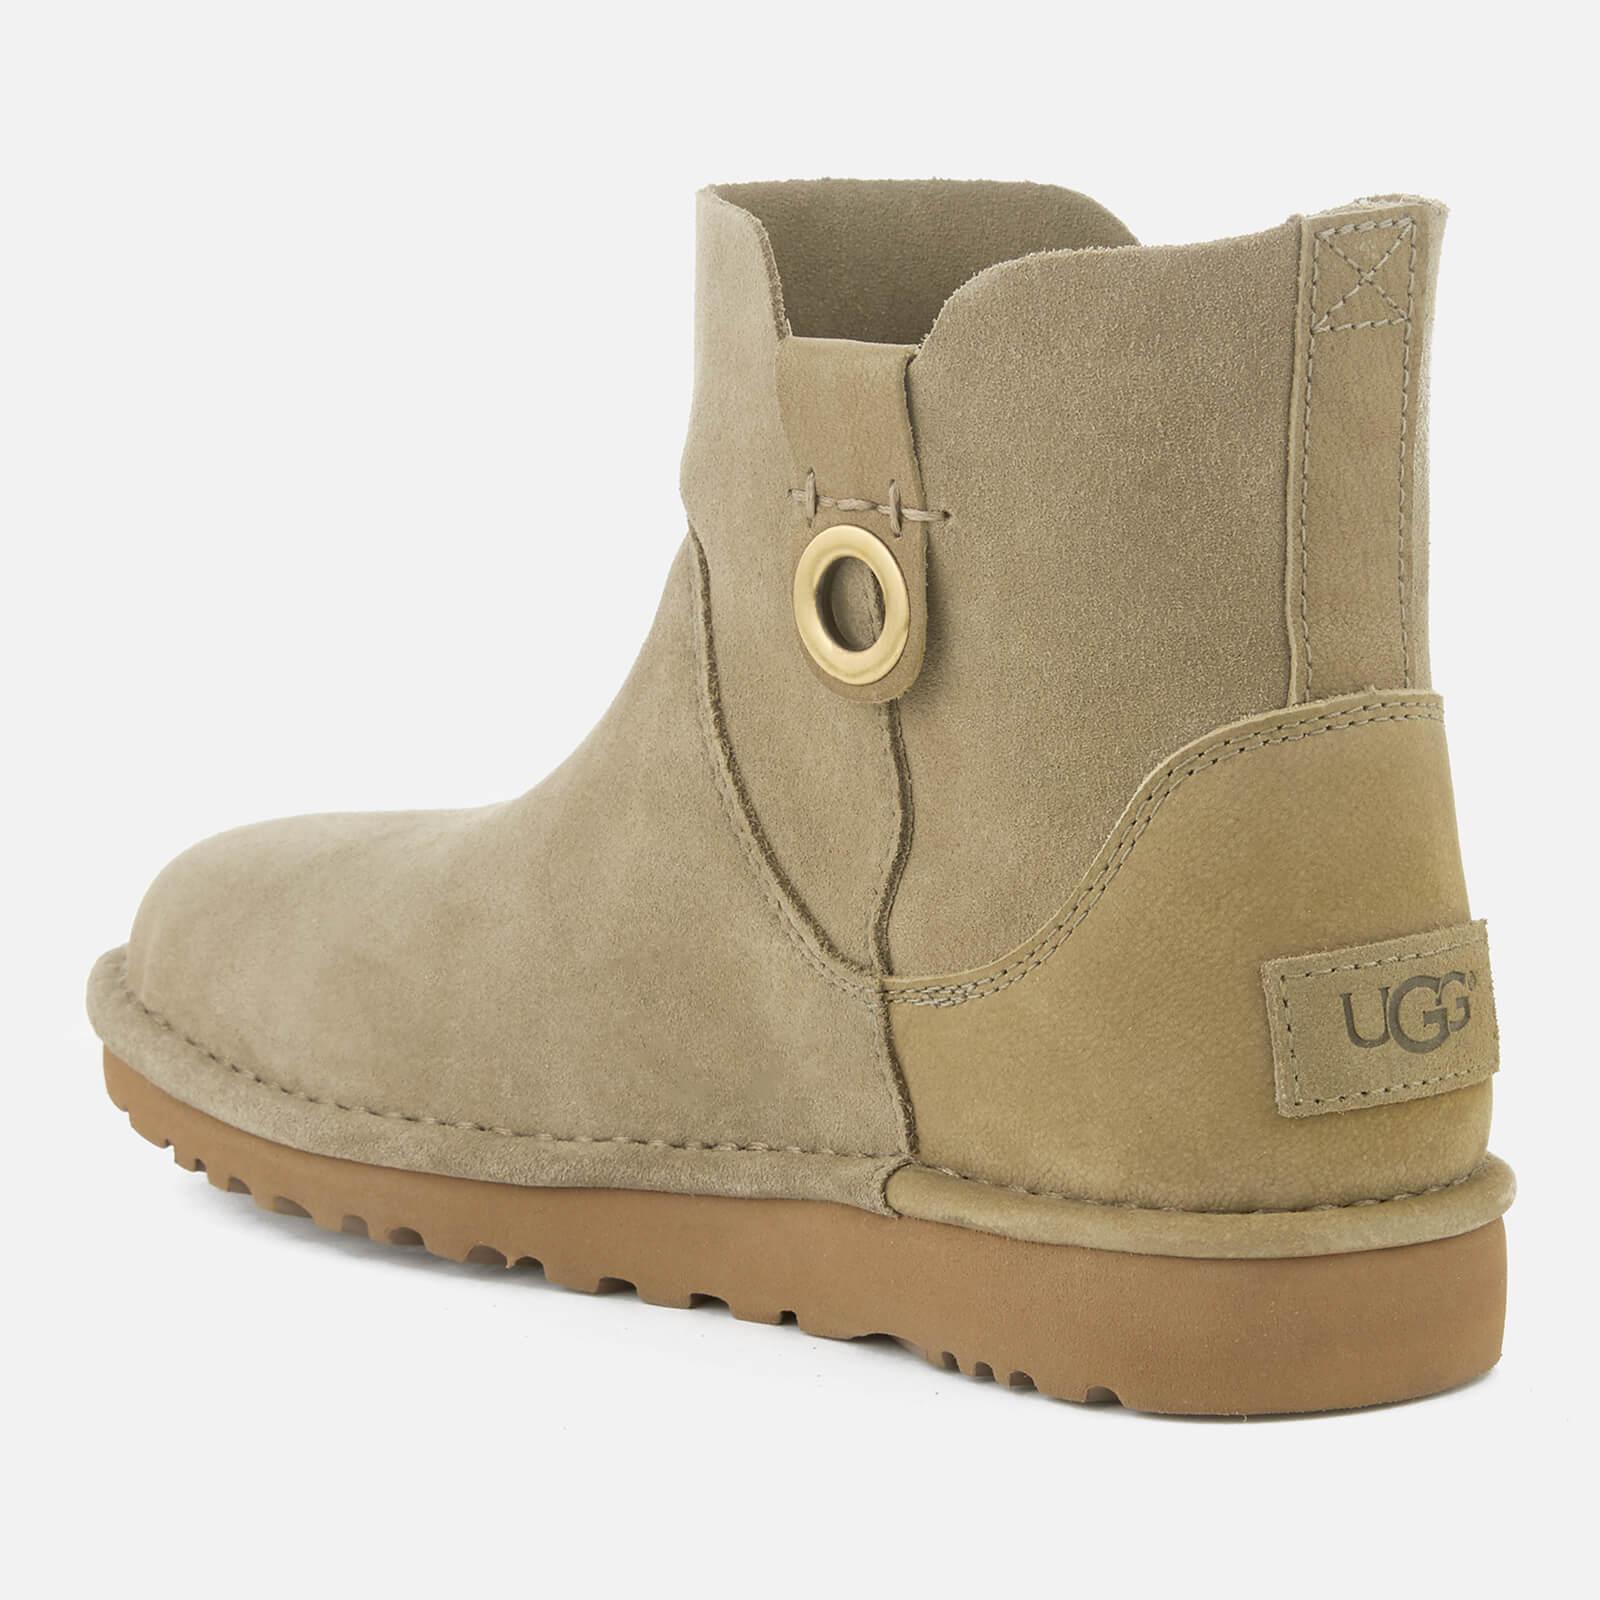 UGG Gib Suede Unlined Ankle Boots in Khaki Green (Green) - Lyst